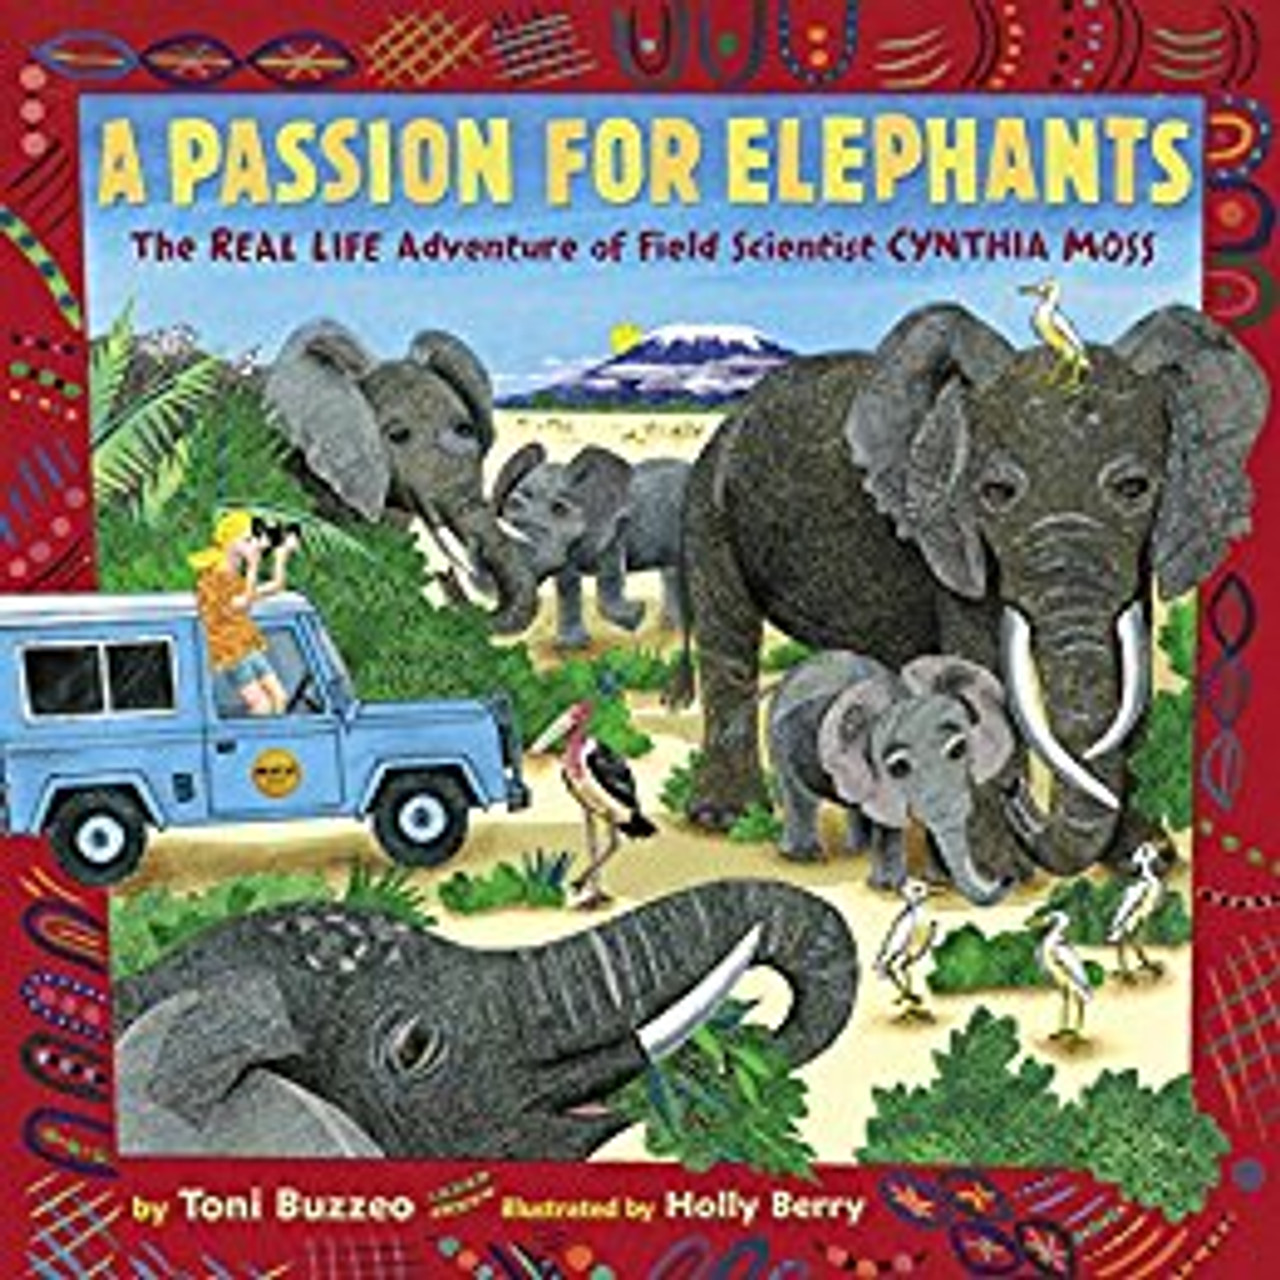 A Passion for Elephants: The Real Life Adventure of Field Scientist Cynthia Moss by Toni Buzzeo